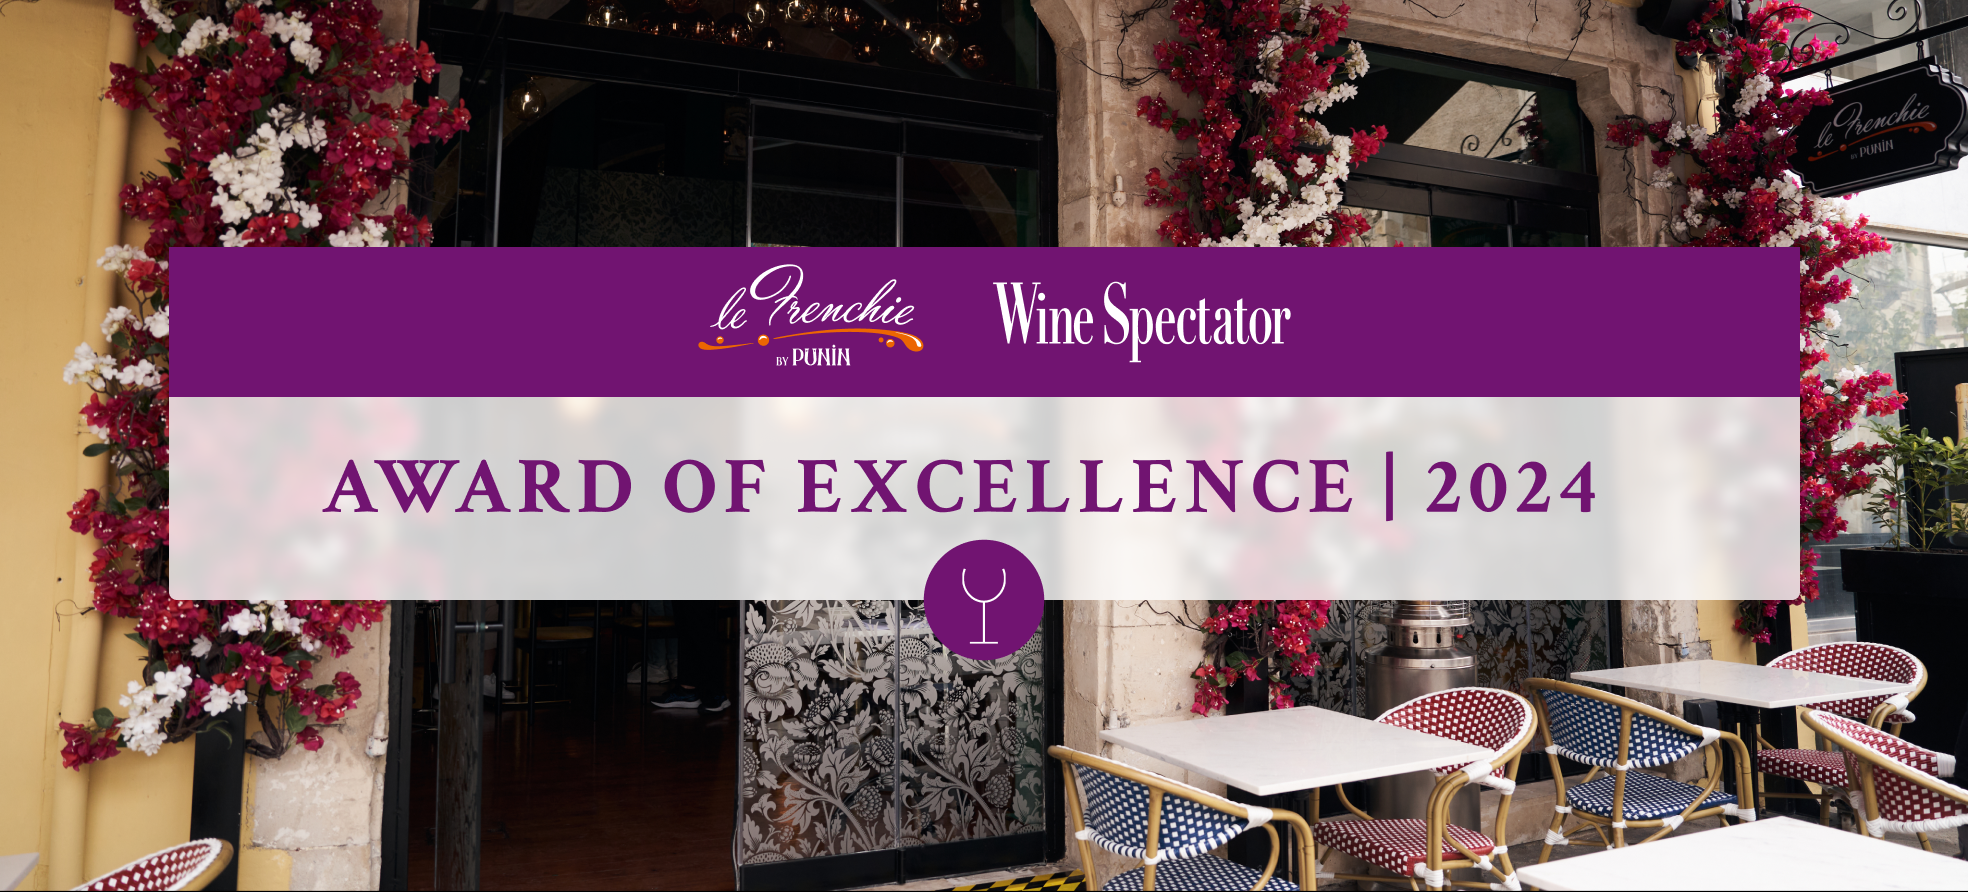 Le Frenchie by PUNIN awarded Wine Spectator 2024 Award of Excellence